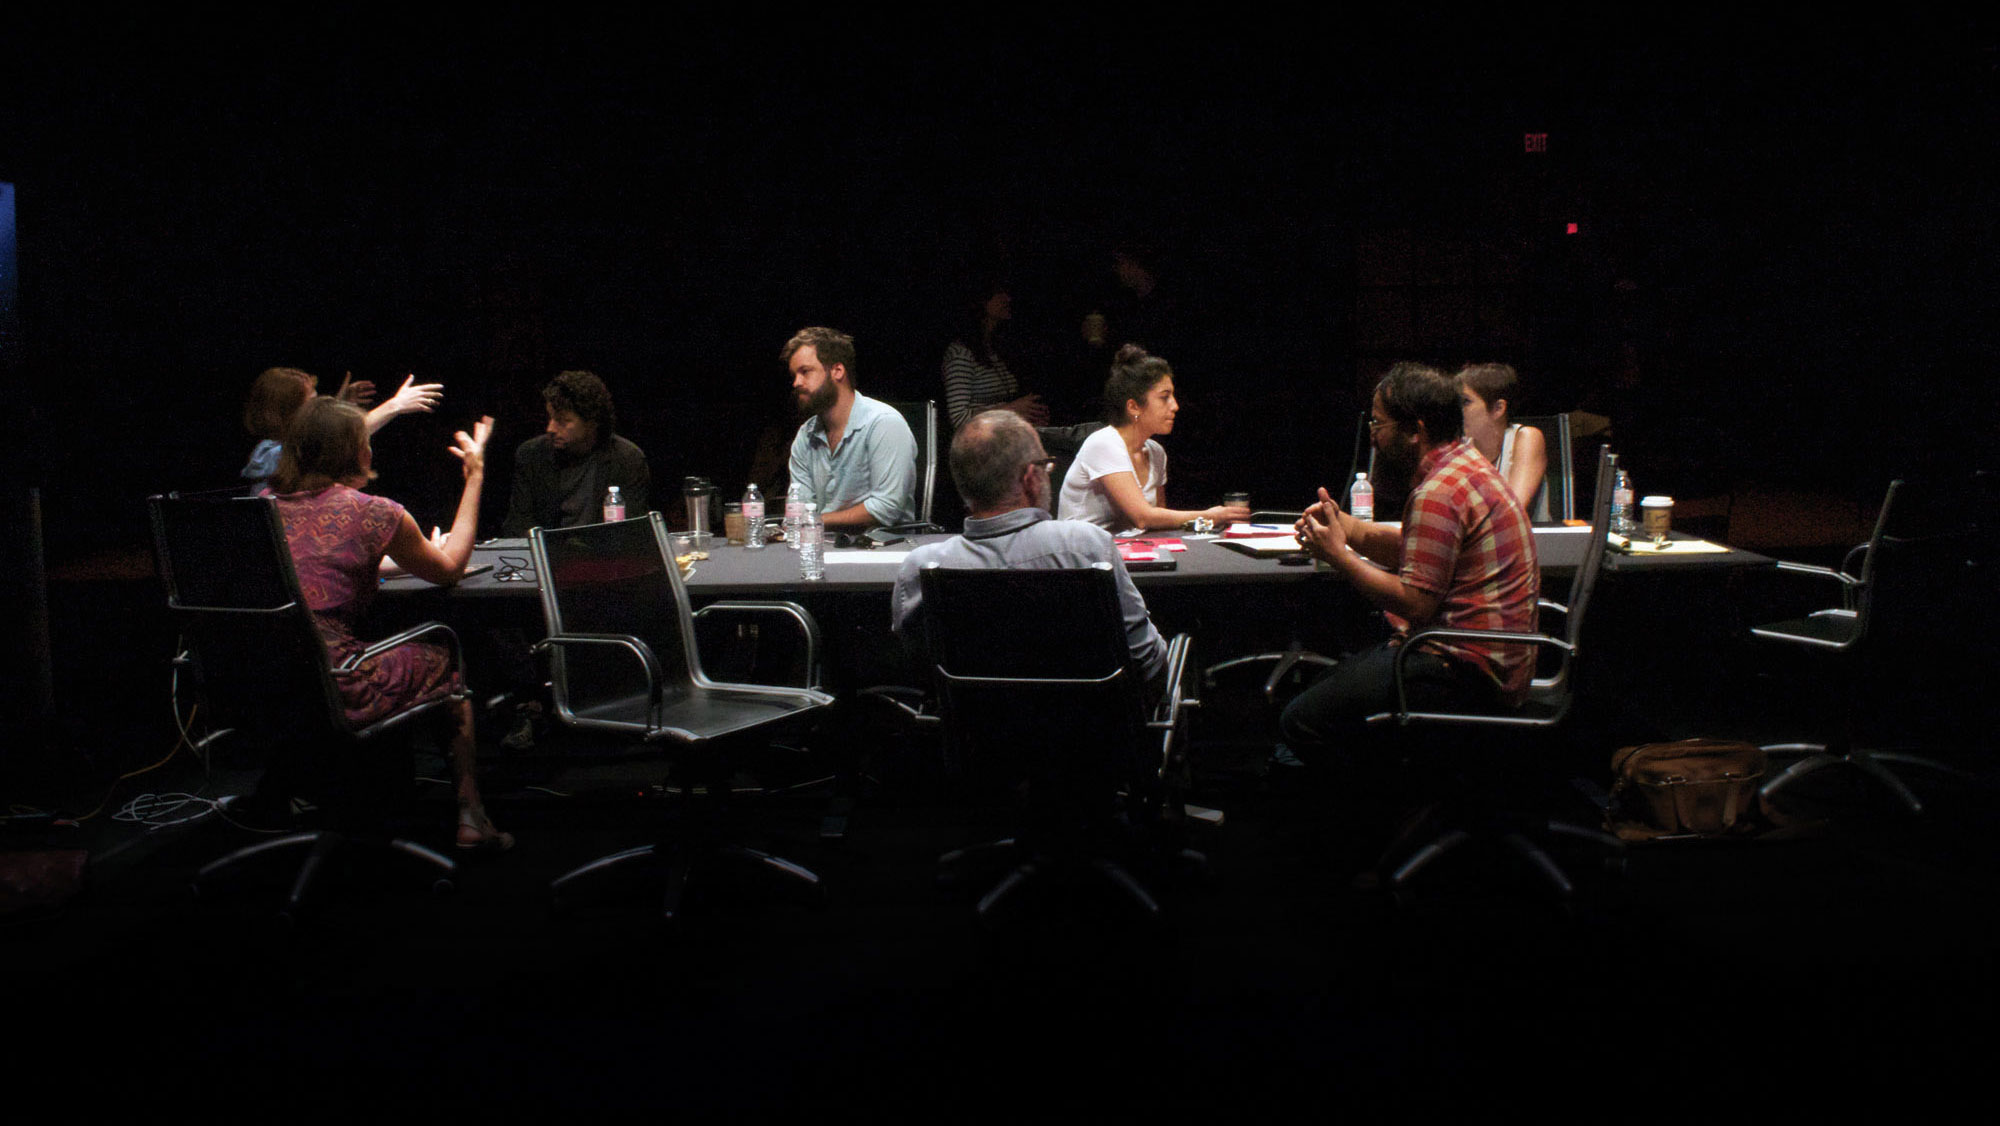 A group of eight in active discussion sitting around a conference table in a darkened room. 